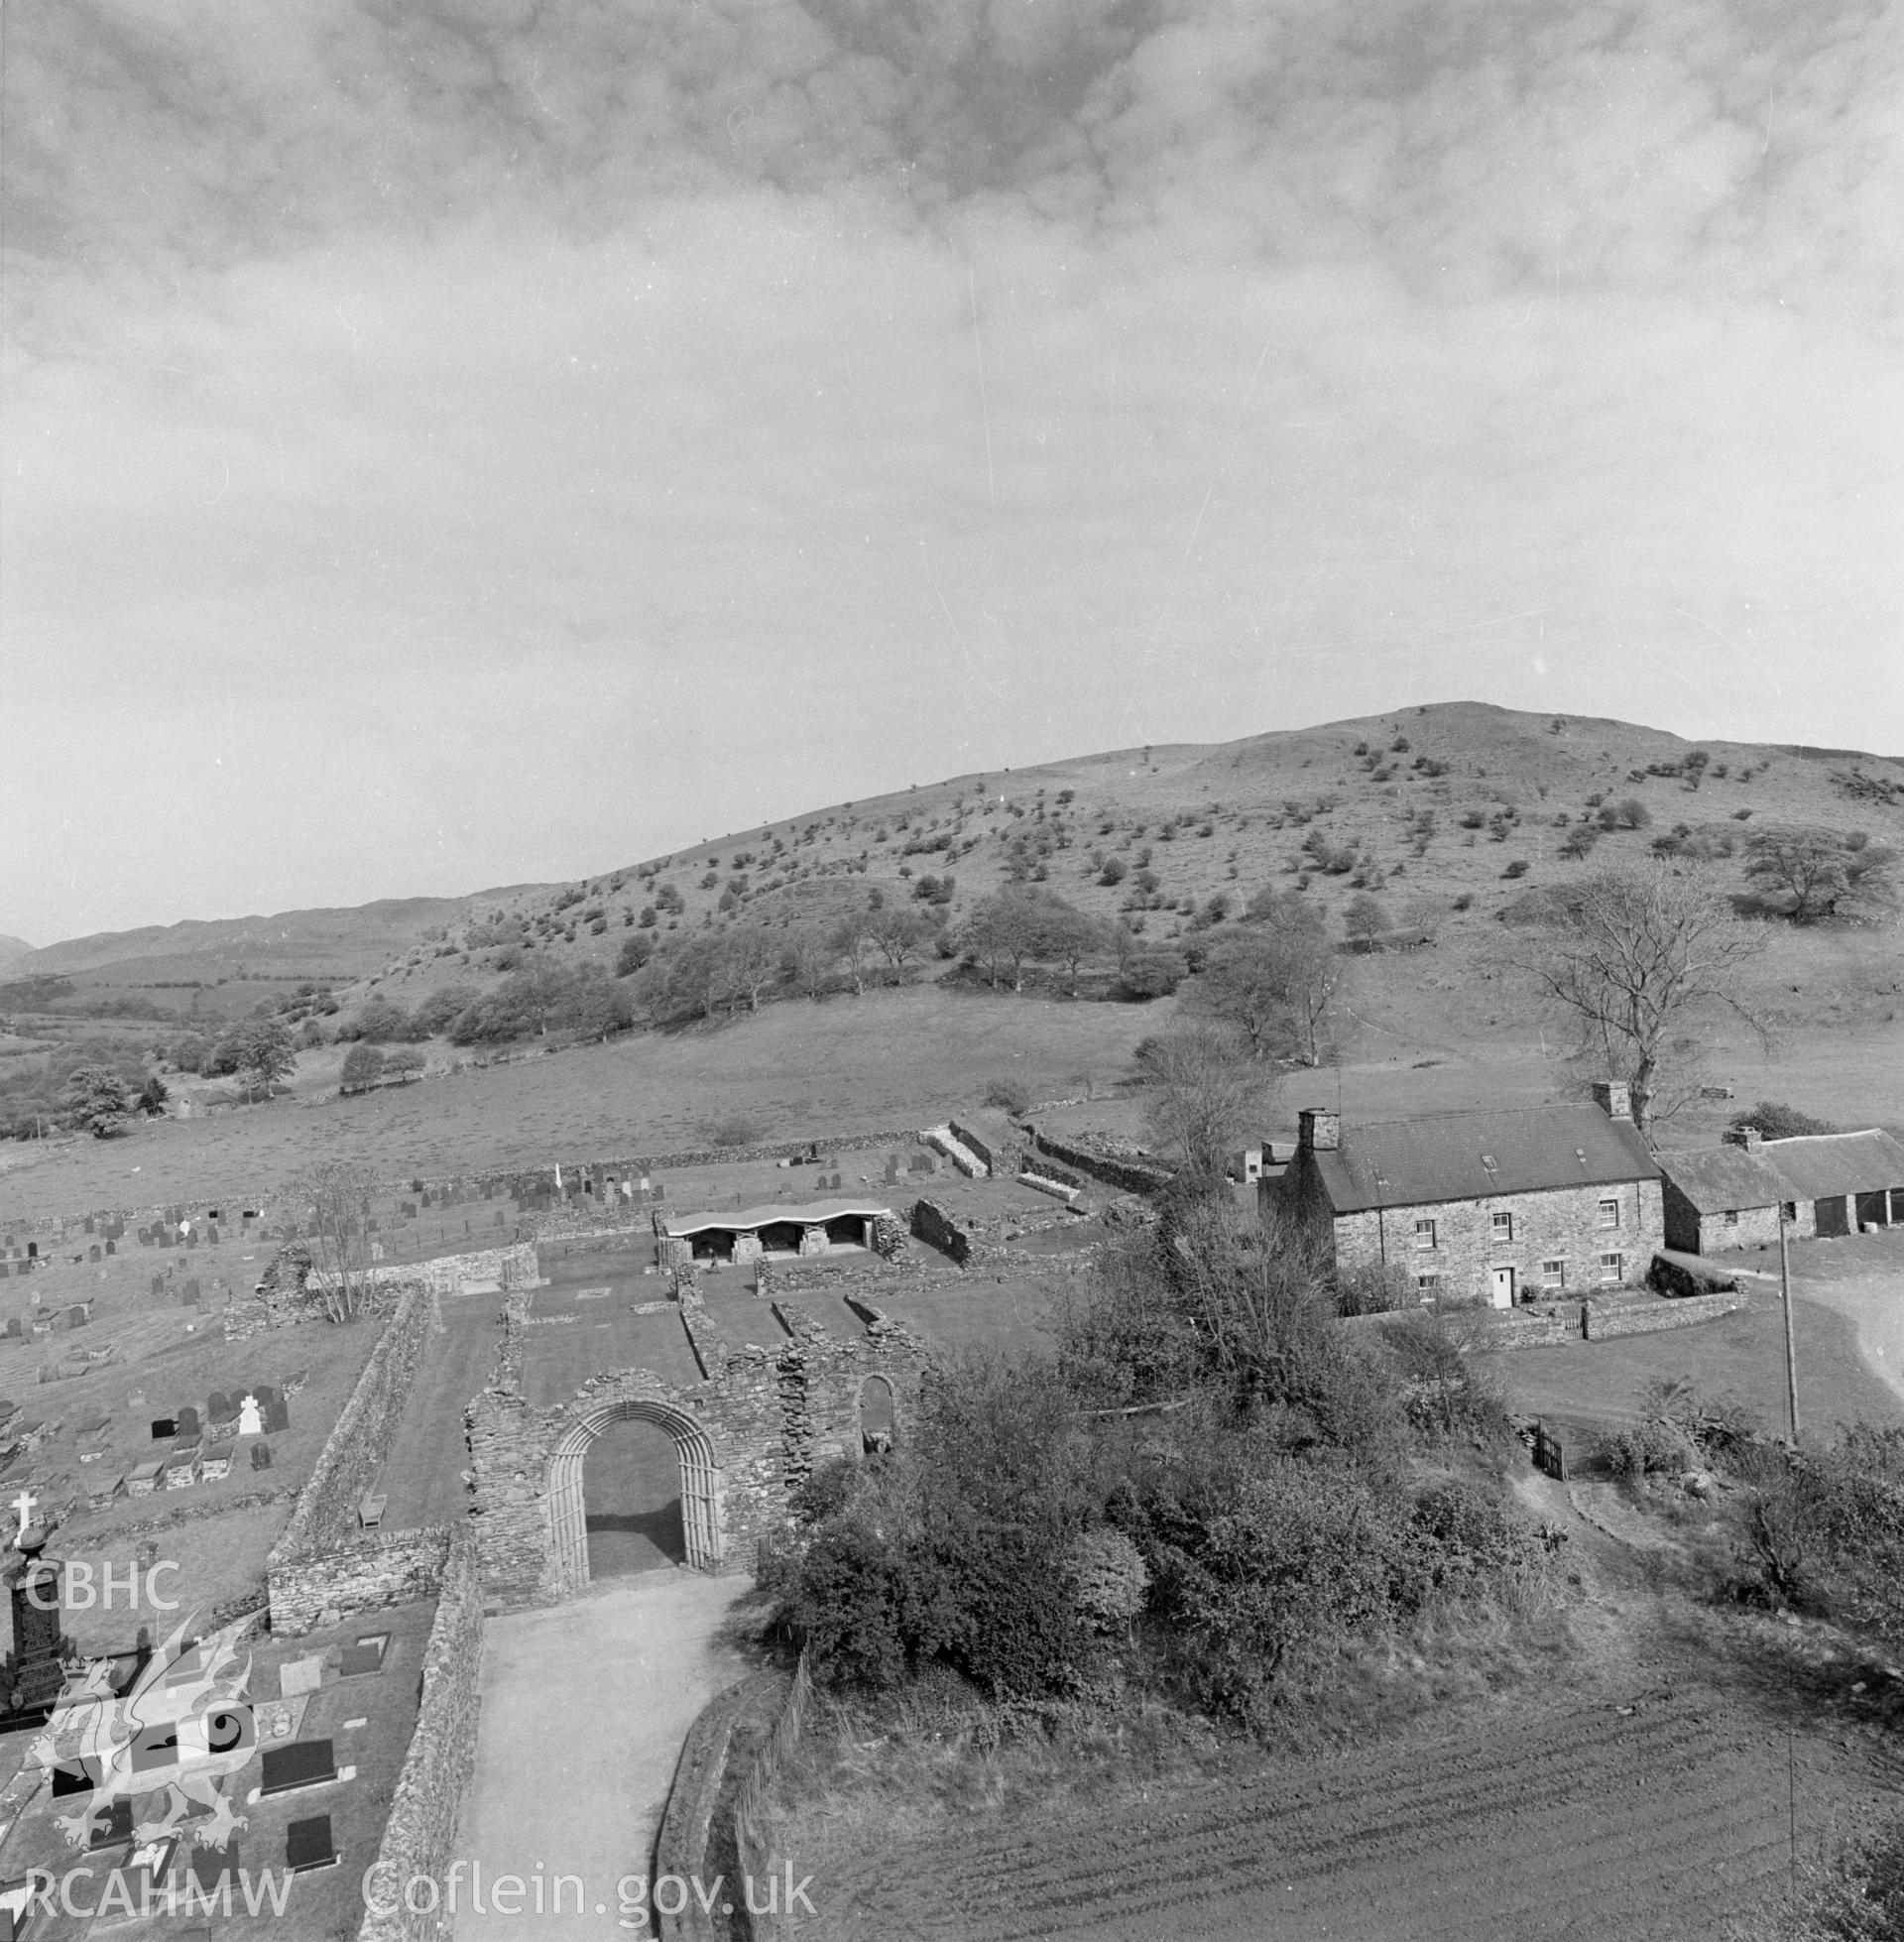 Digital copy of a black and white negative showing hi-spy view of Strata Florida.